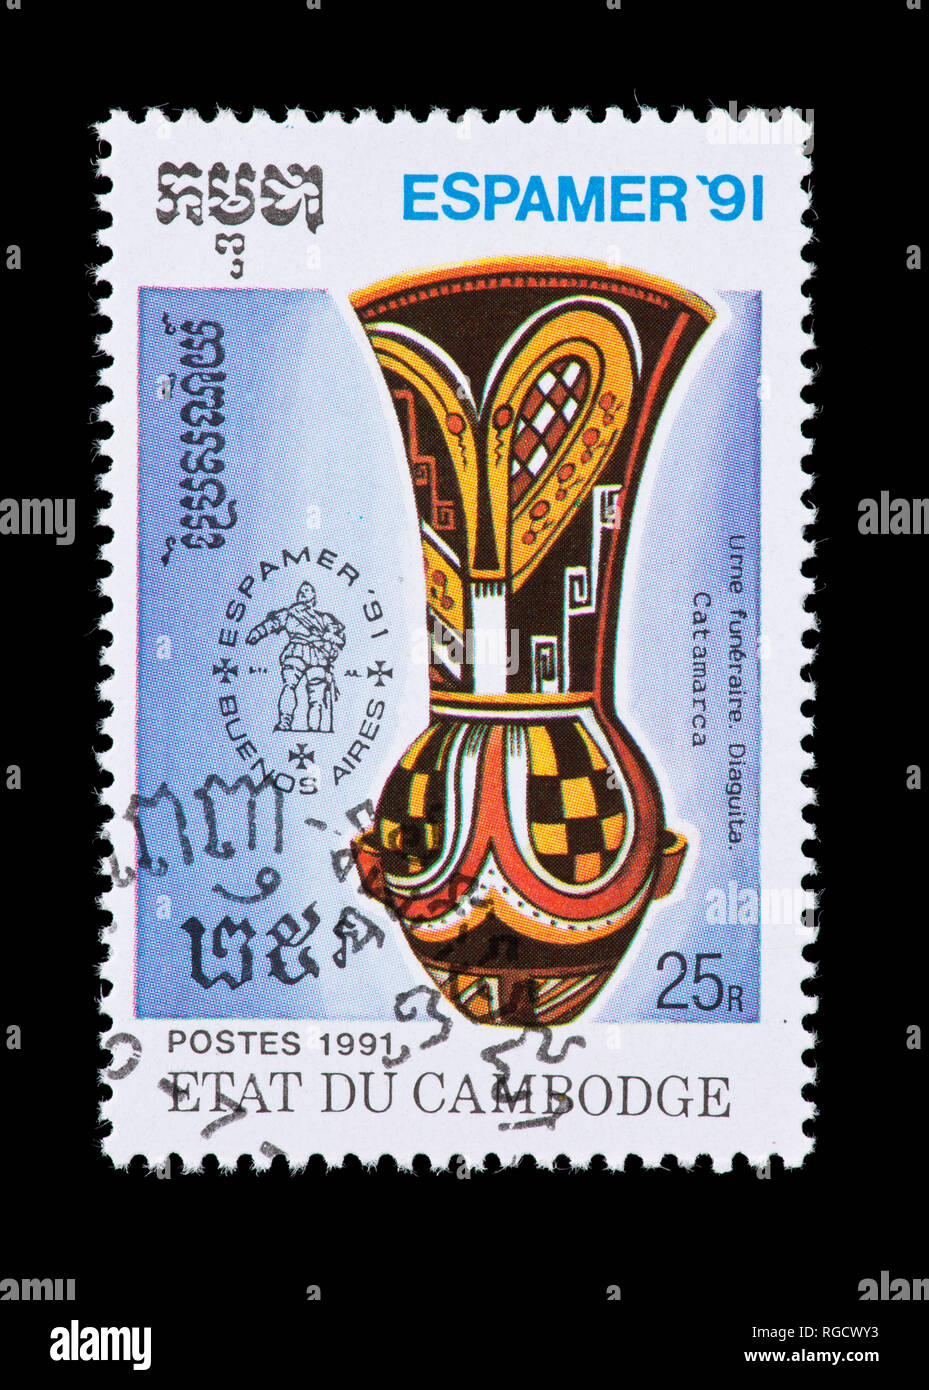 Postage stamp from Cambodia depicting a pre-Columbian Catamarca example of pottery. Stock Photo